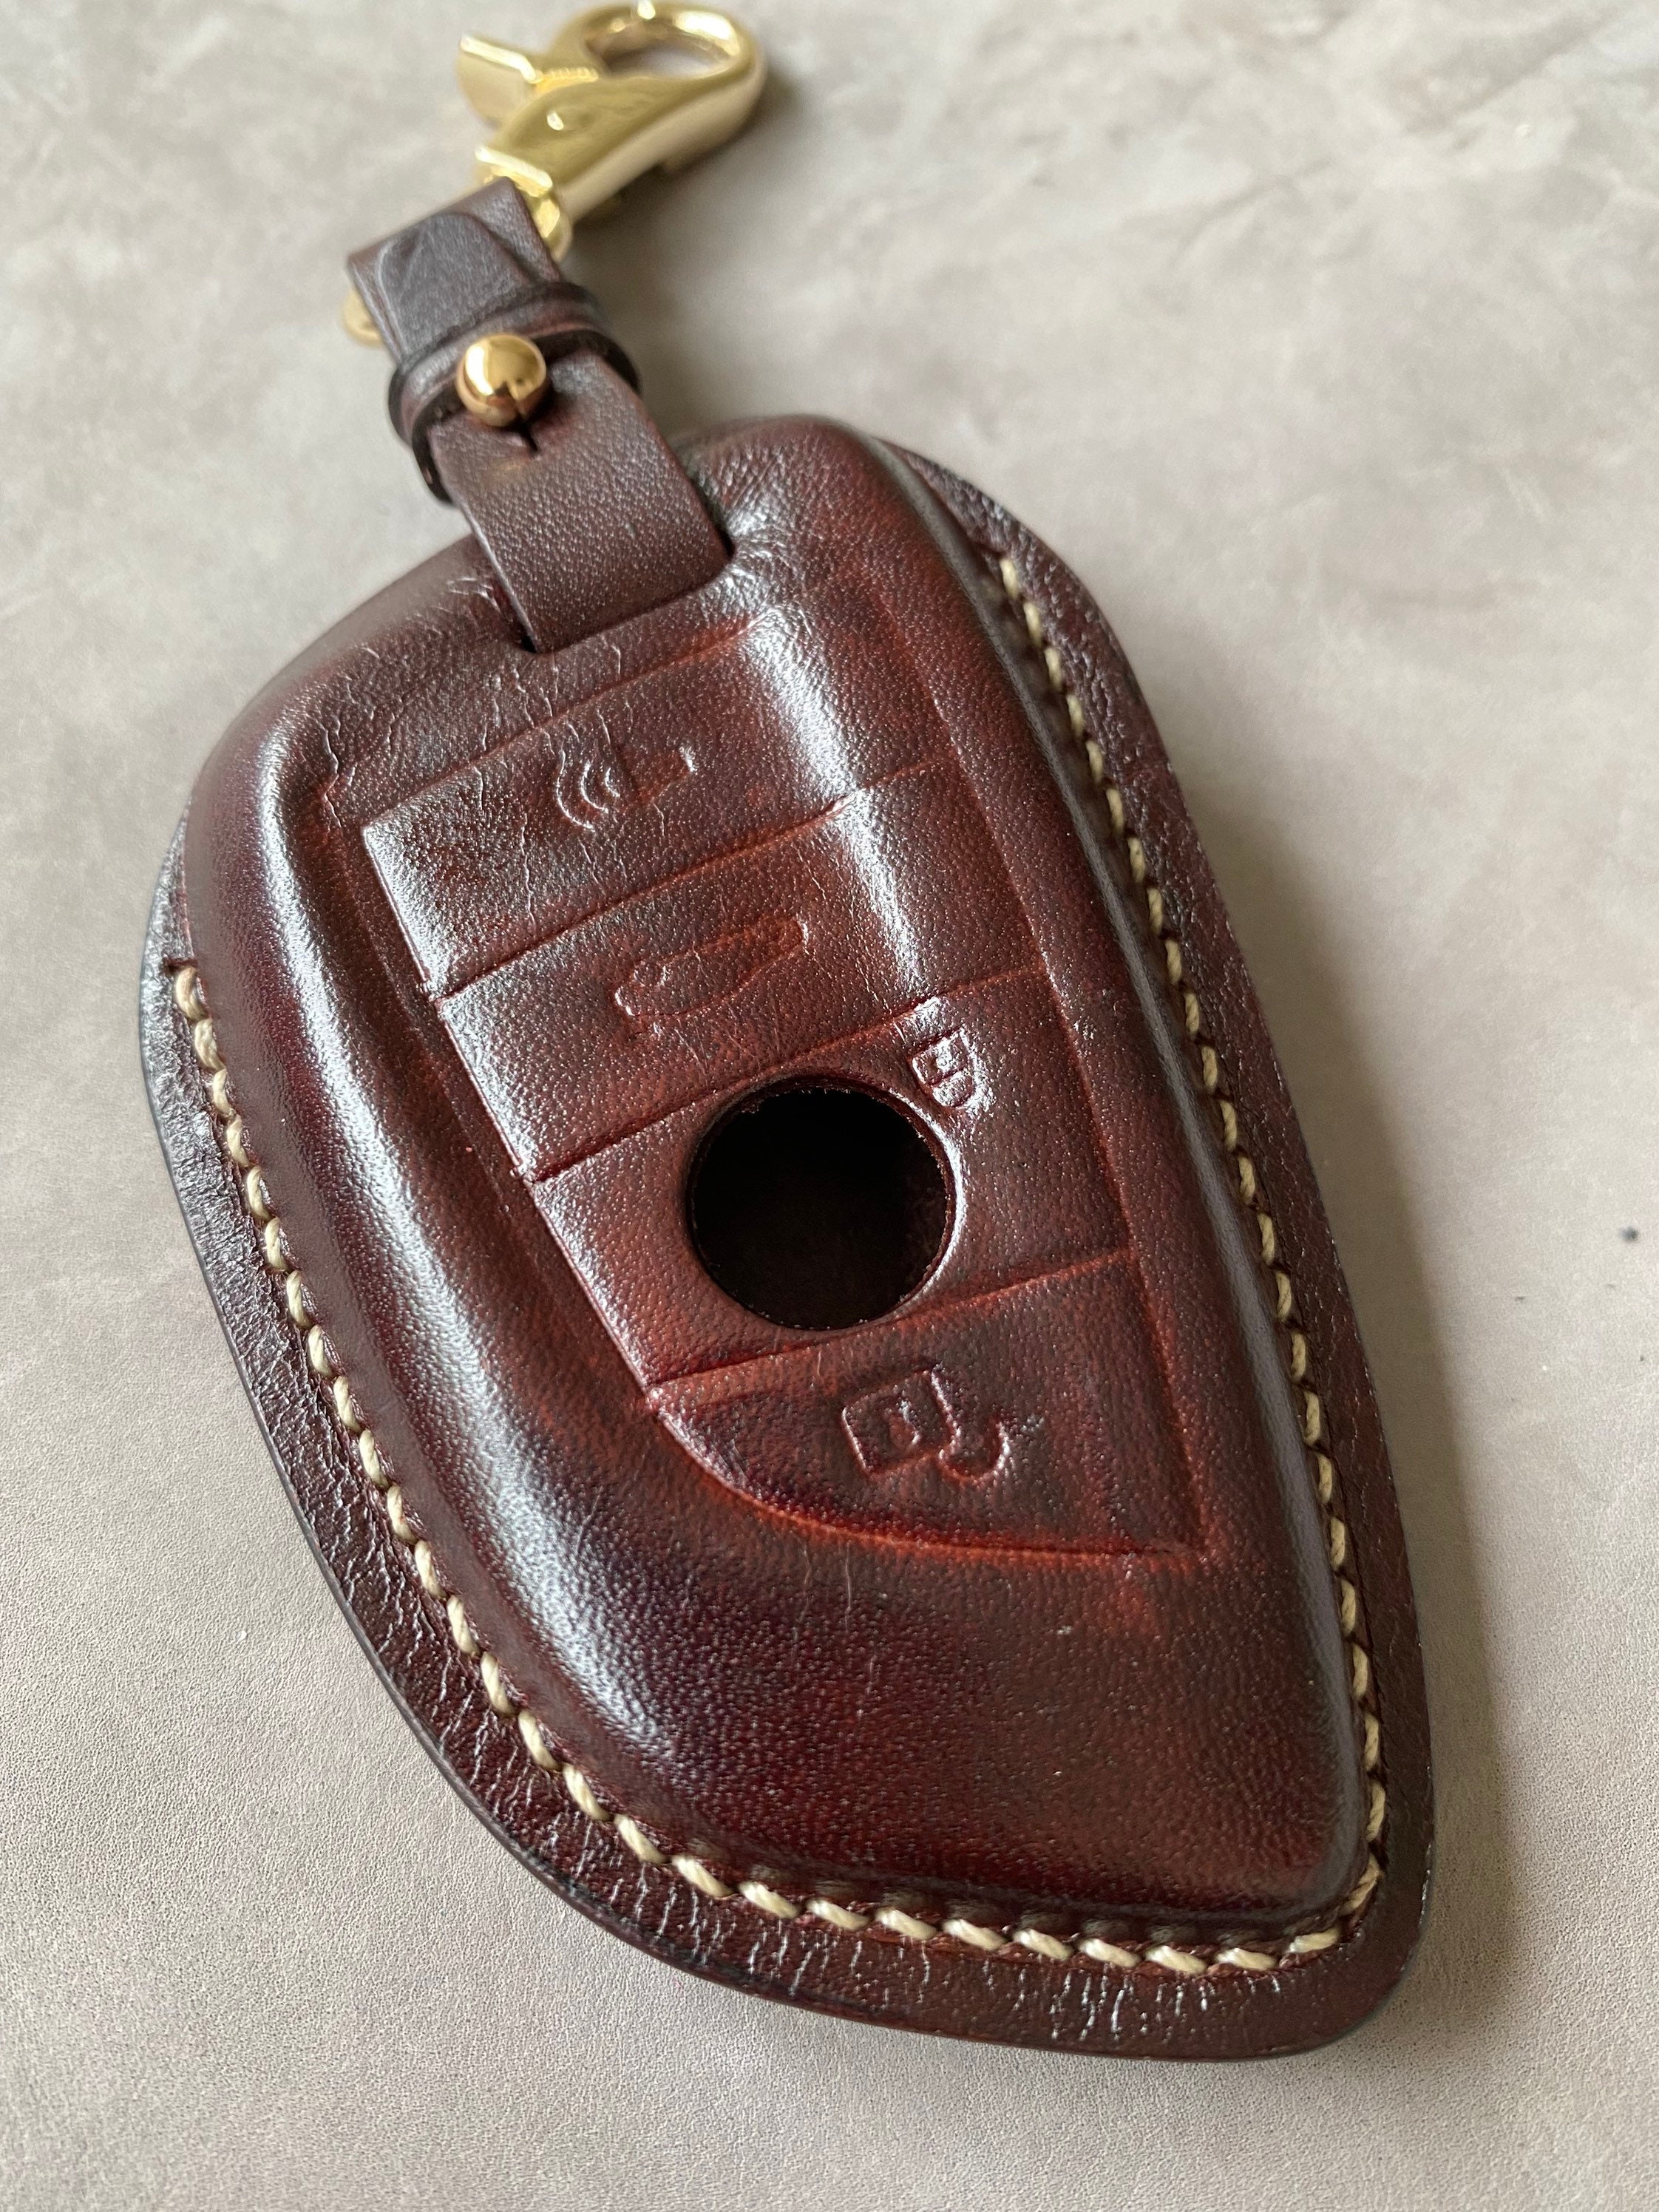 Handmade BMW Car Key Case, Leather Car Key Fob Cover, Kechain, Remote Key  Case, Leather Case, Personalized, Bmw Car Accessories, Gifts 